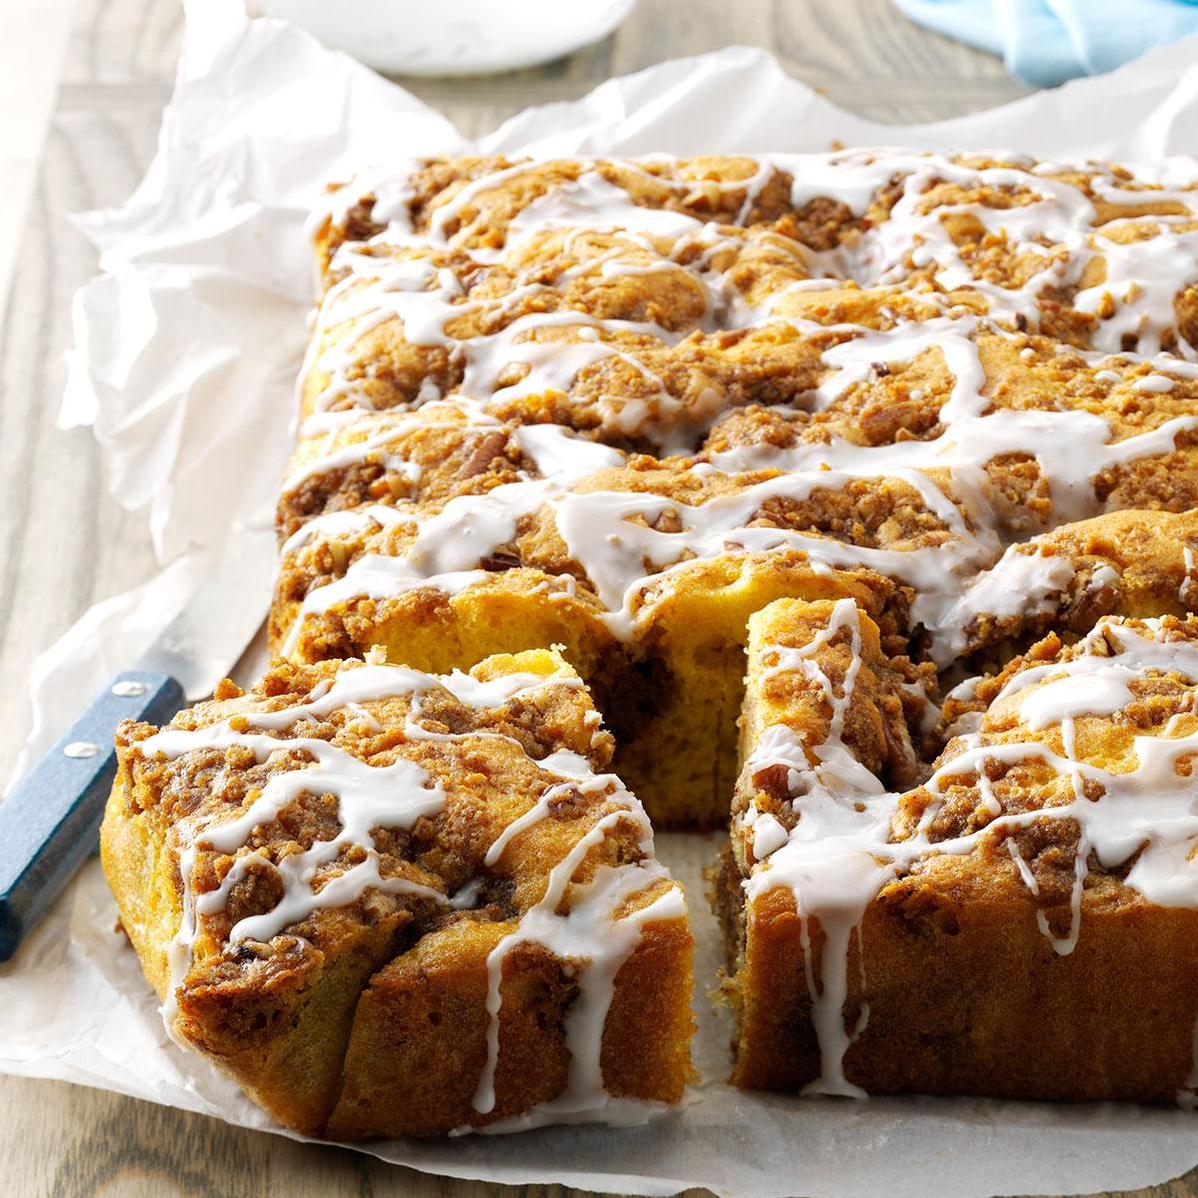  This soft and moist coffee cake is a total treat for your taste buds.